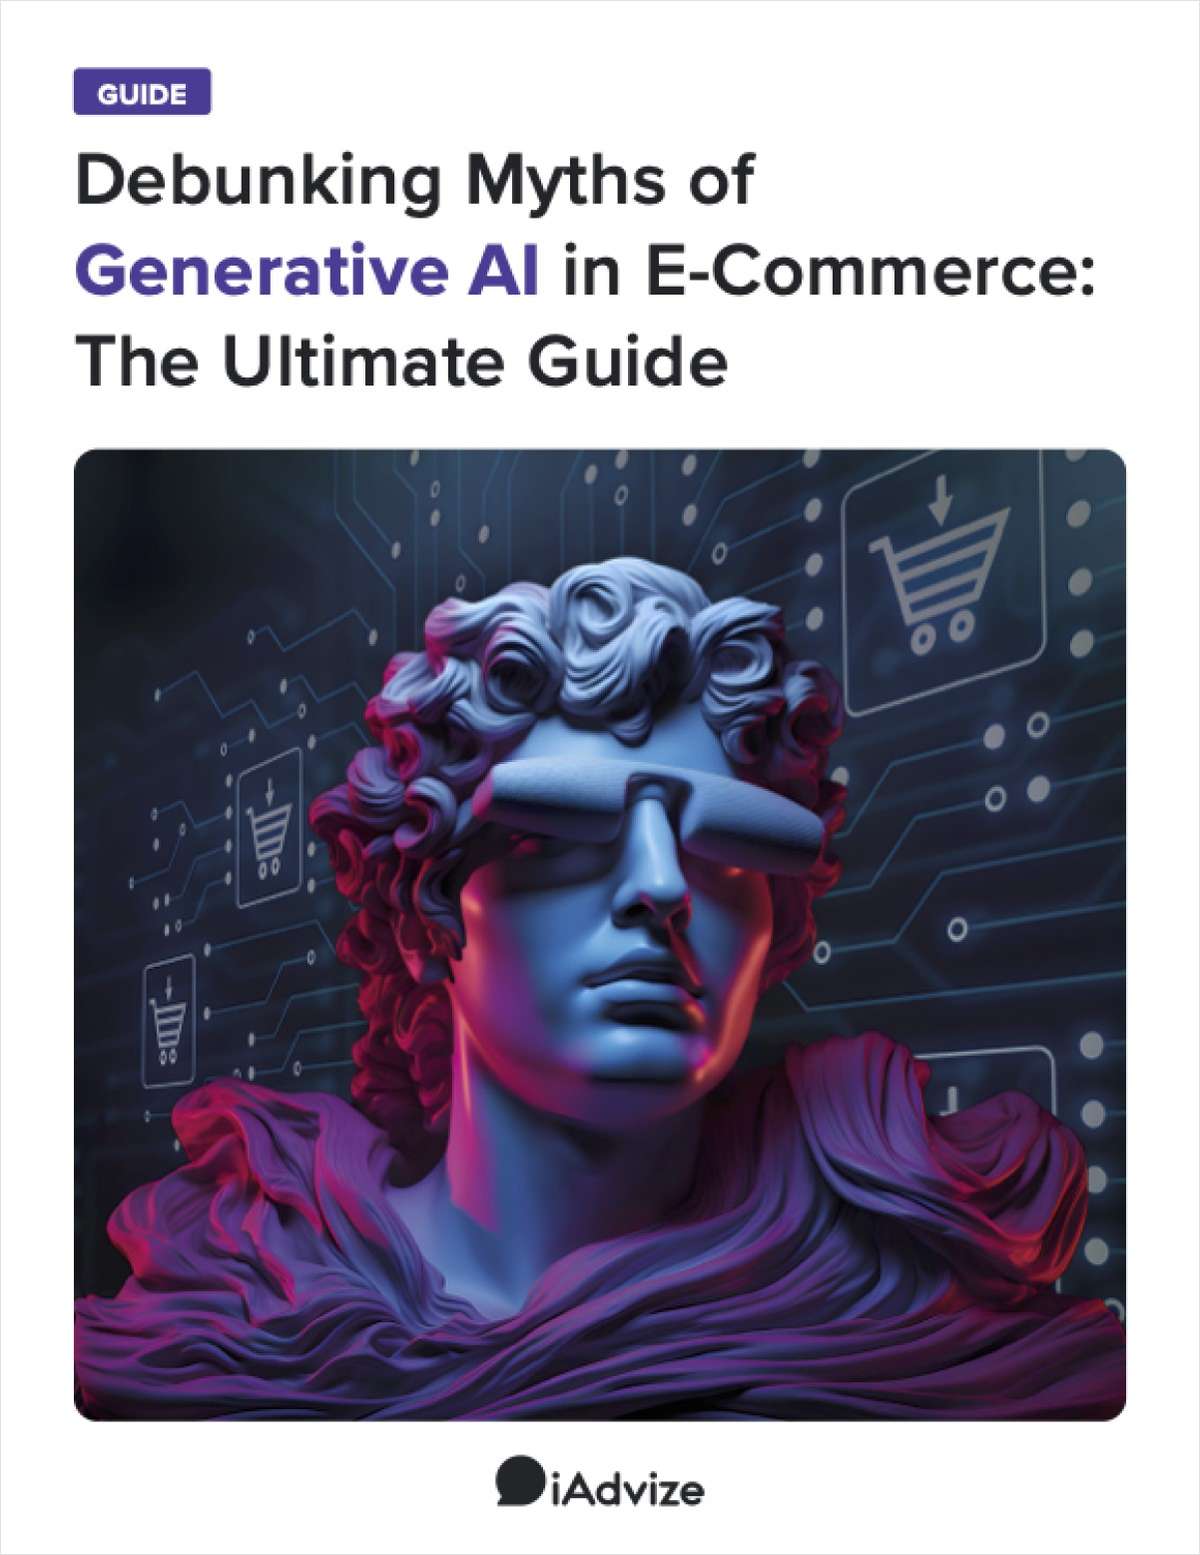 Debunking Myths of Generative AI in E-Commerce: The Ultimate Guide